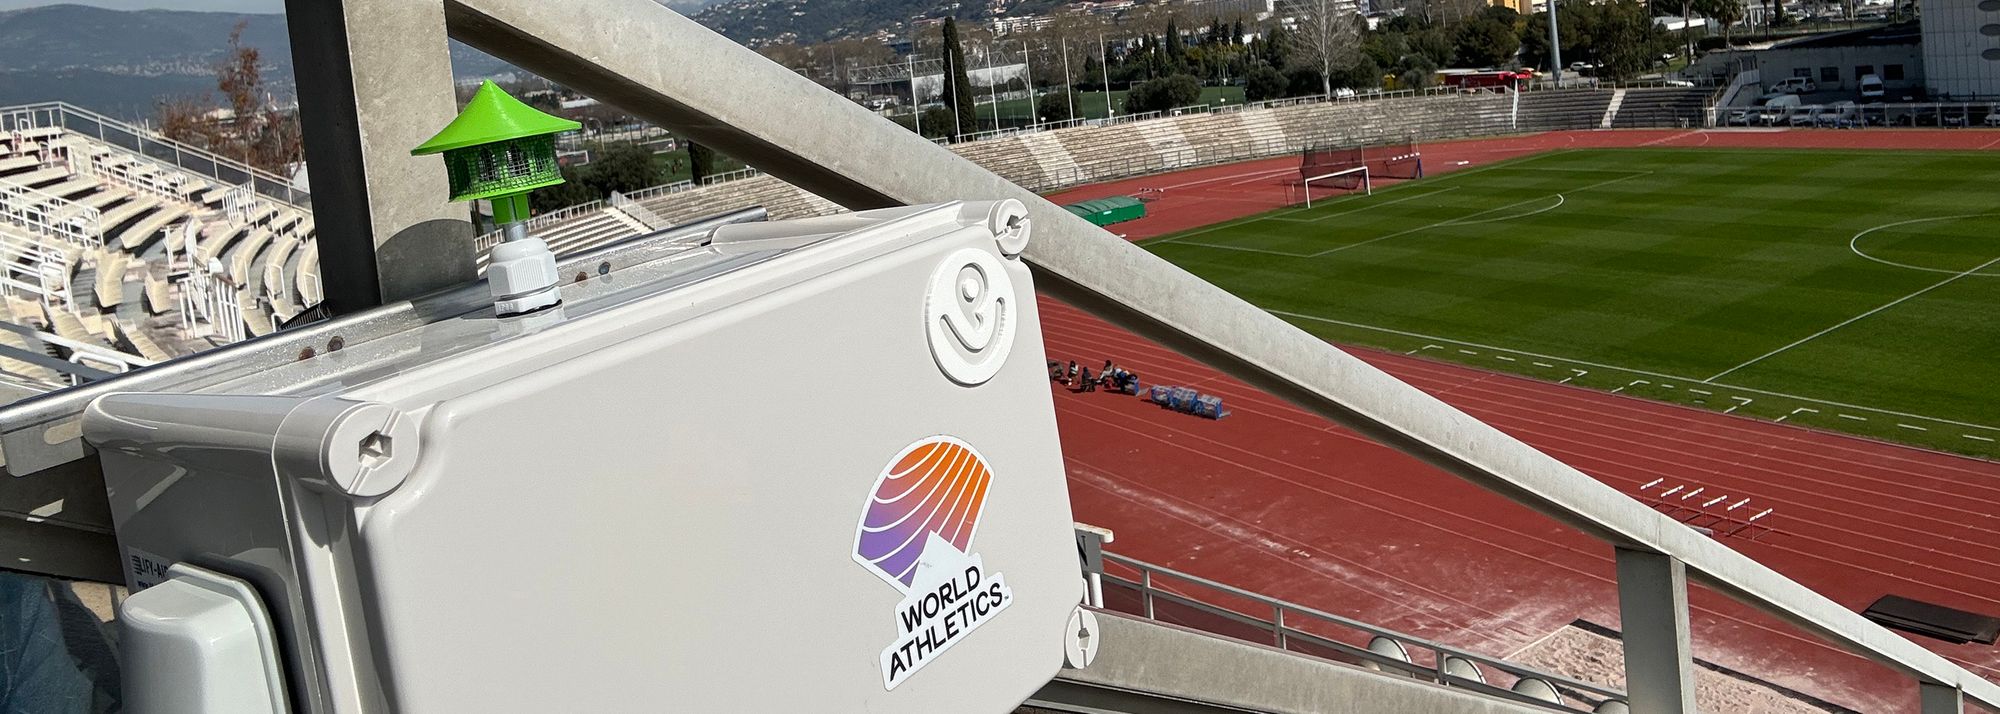 Building on its experience in measuring air quality in stadiums, the Health & Science Department at World Athletics has taken a new step in protecting the health of athletes